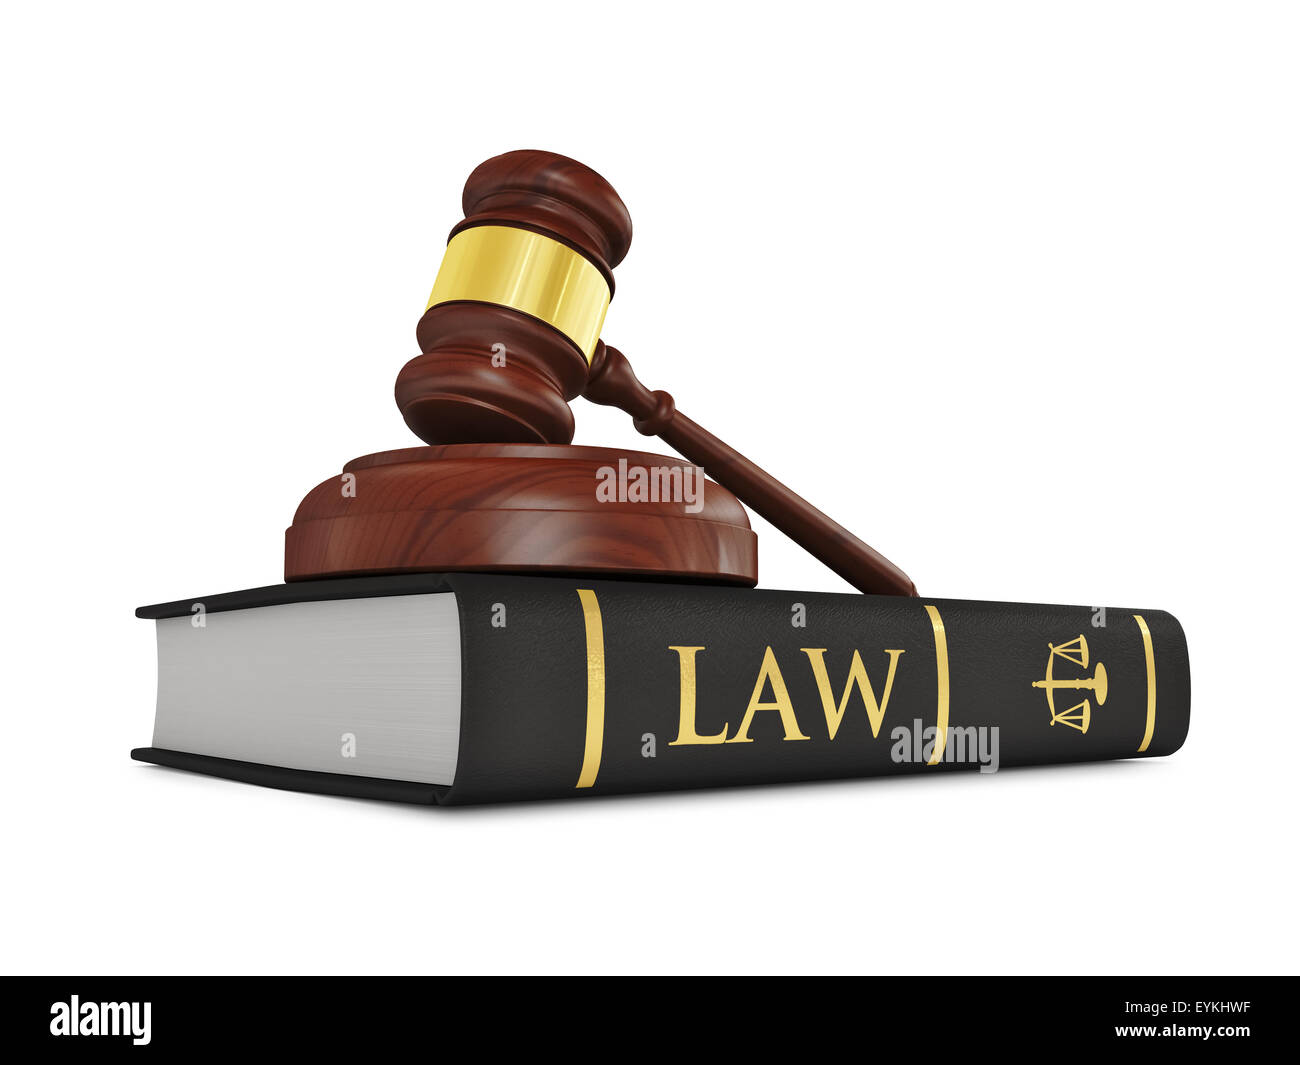 Law justice concept - wooden judge gavel on law book isolated on white background Stock Photo